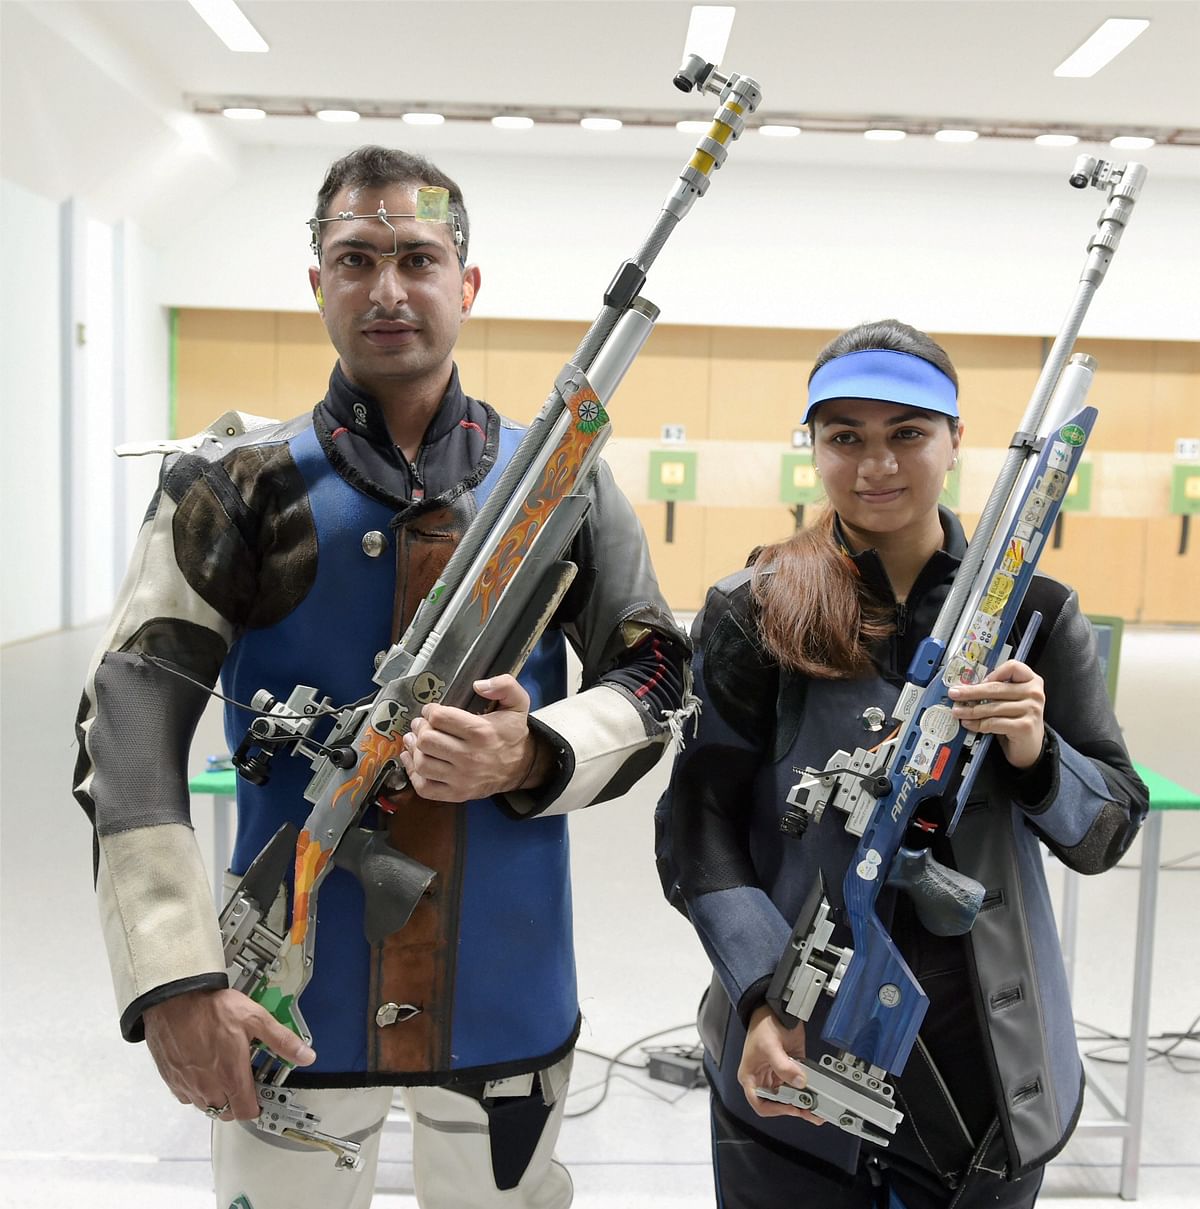 Ravi Kumar and Apurvi Chandela bagged bronze in the 10m Air Rifle mixed team event on Sunday.